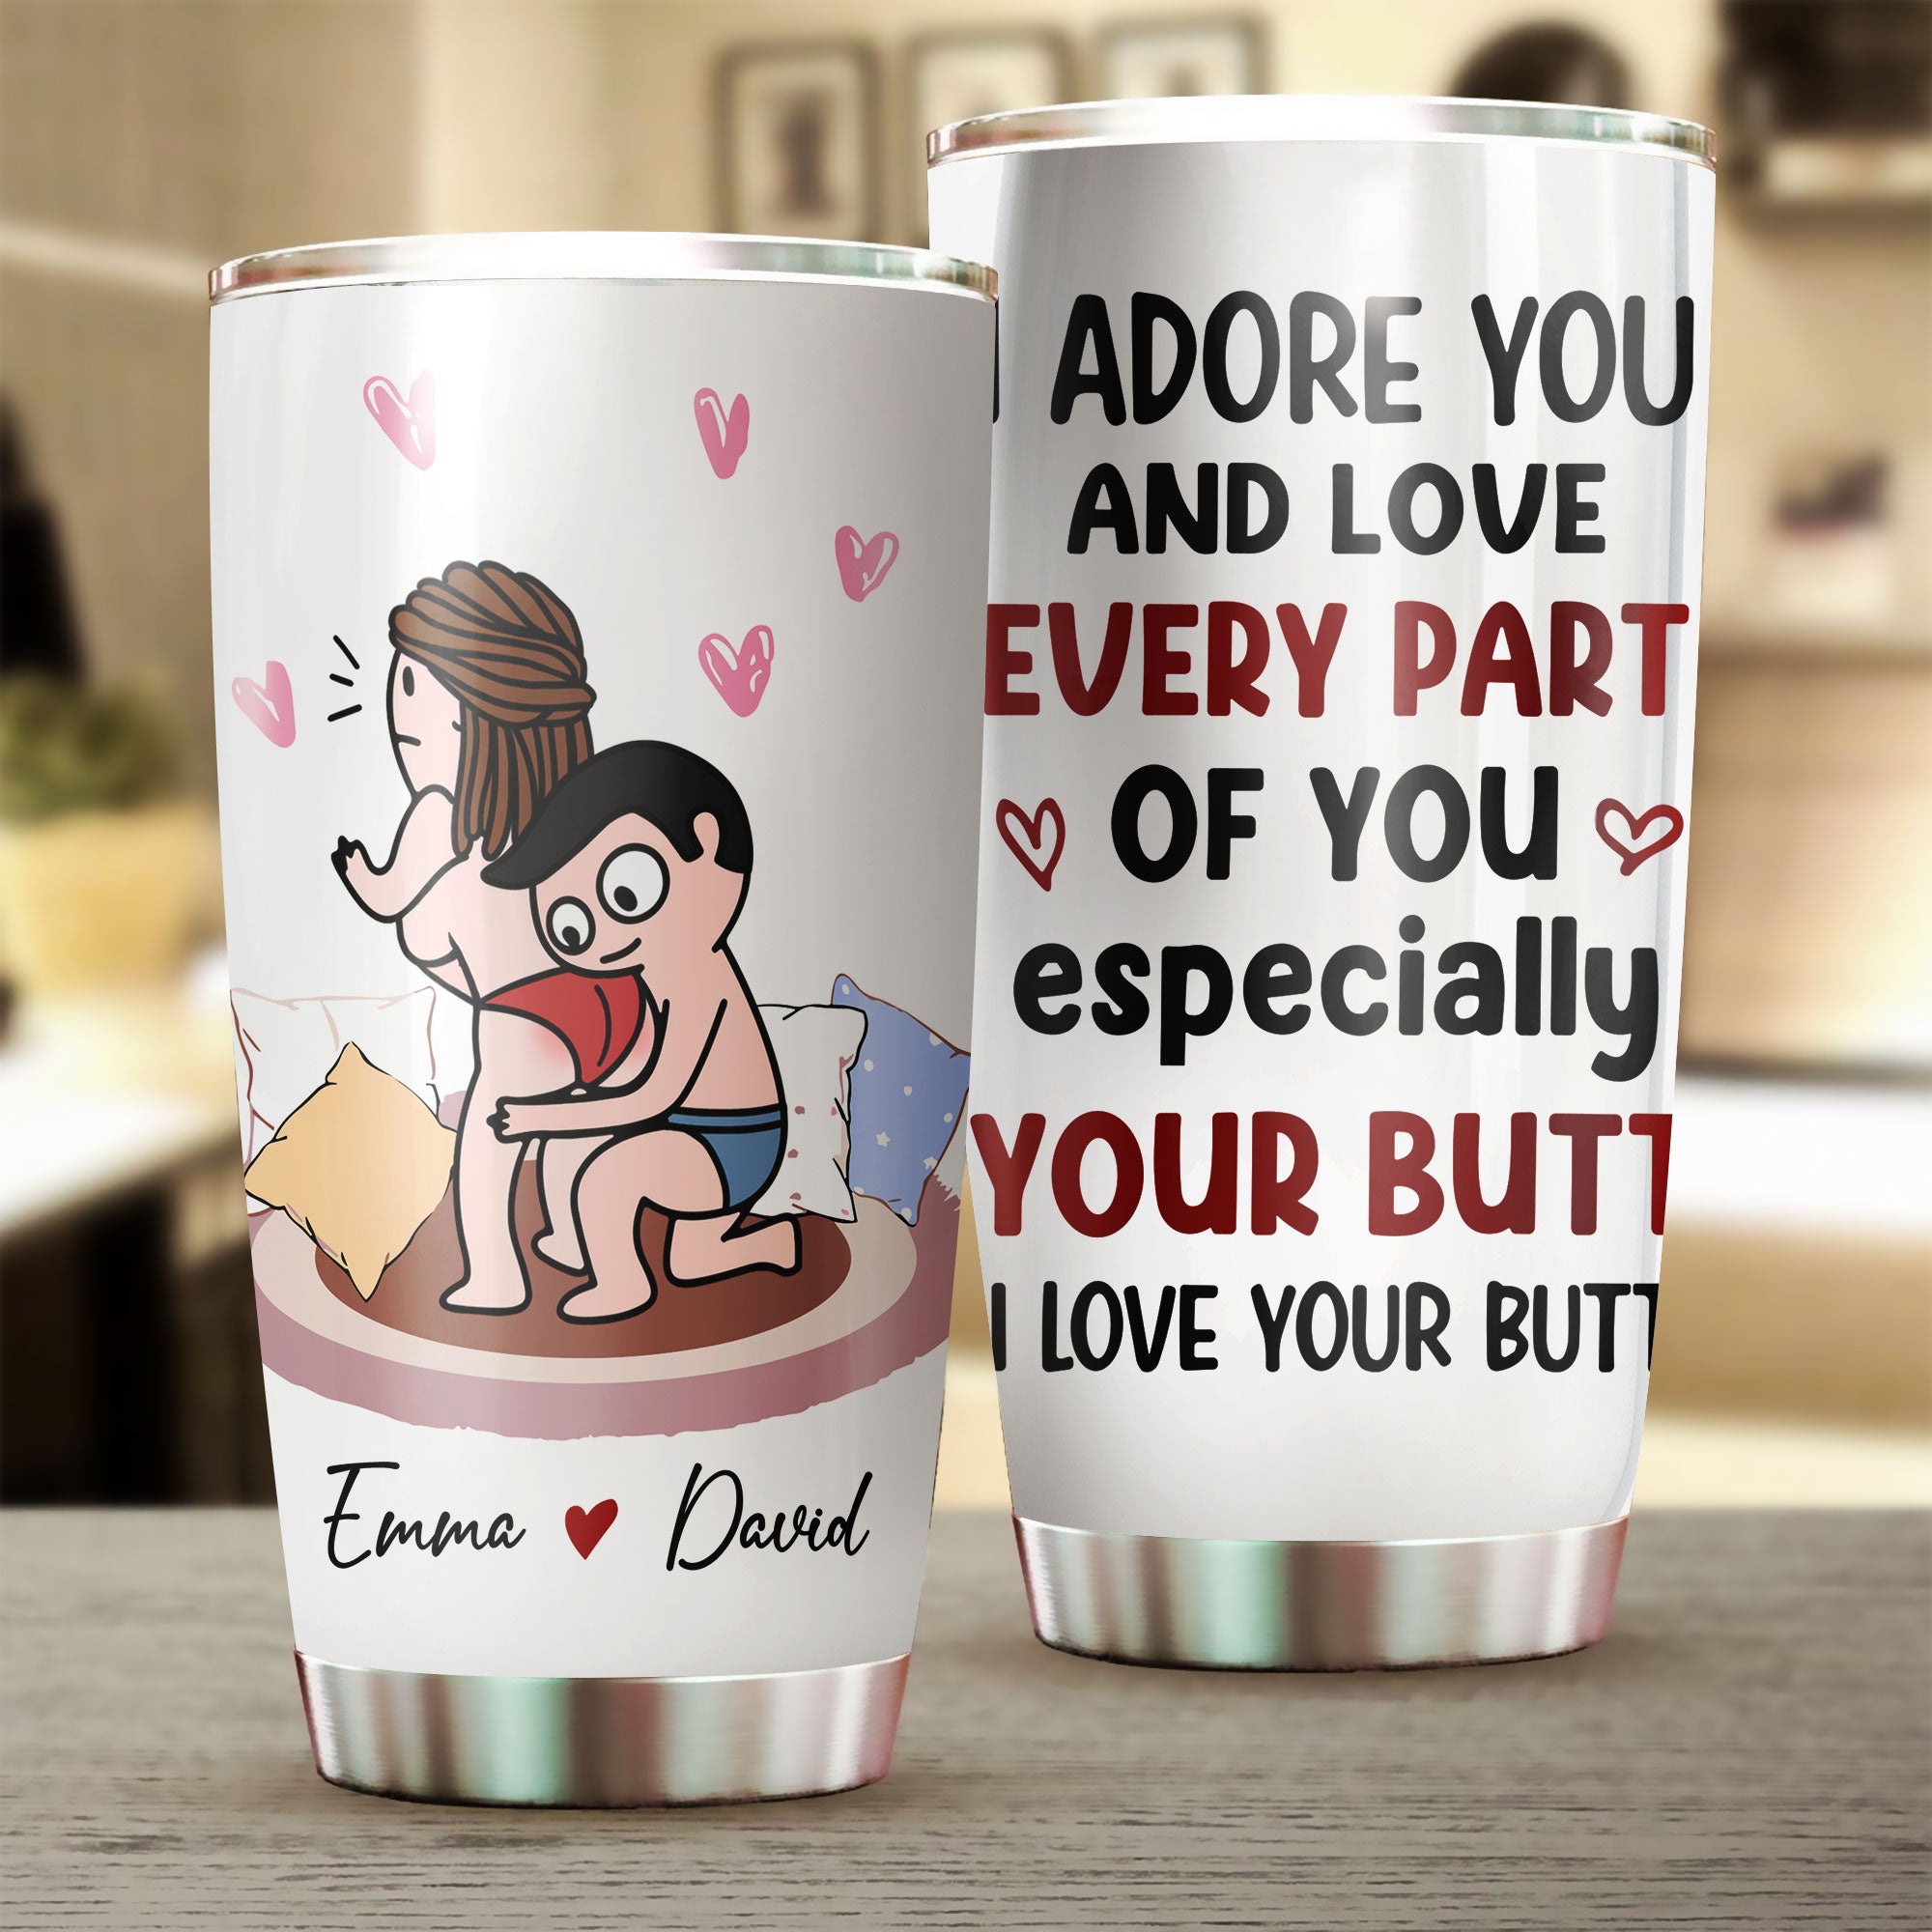 I Adore You Every Part - Personalized Tumbler - Custom Appearance and Names - Gift Idea For Lover